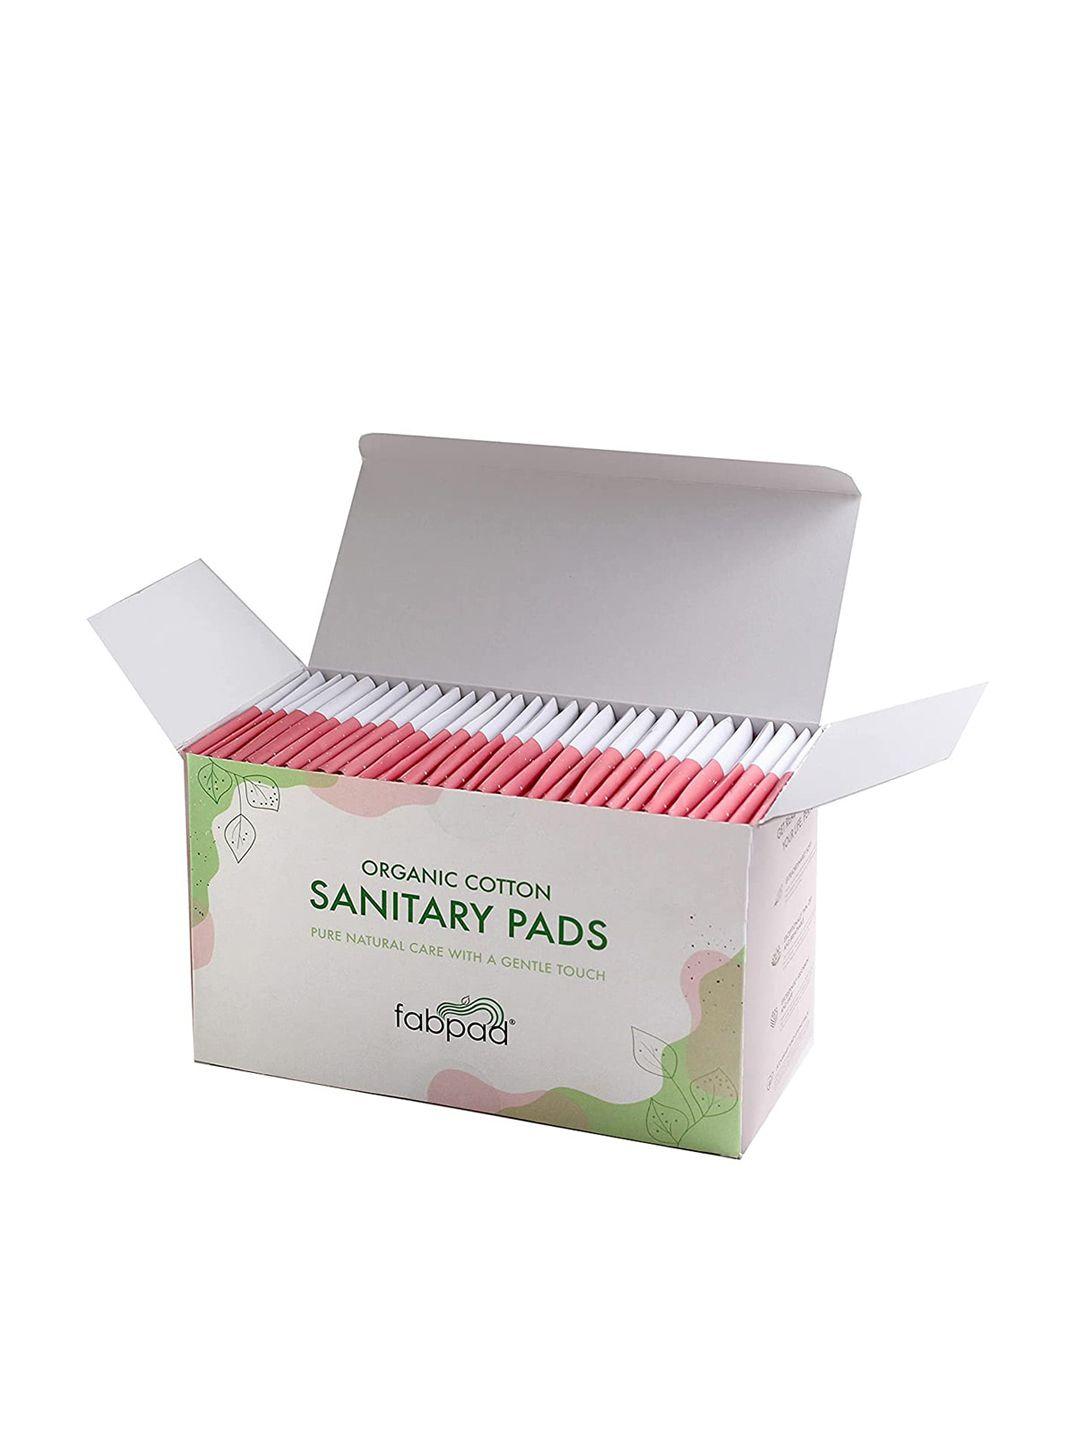 fabpad set of 30 organic cotton ultra thin heavy flow sanitary pads with disposable cover